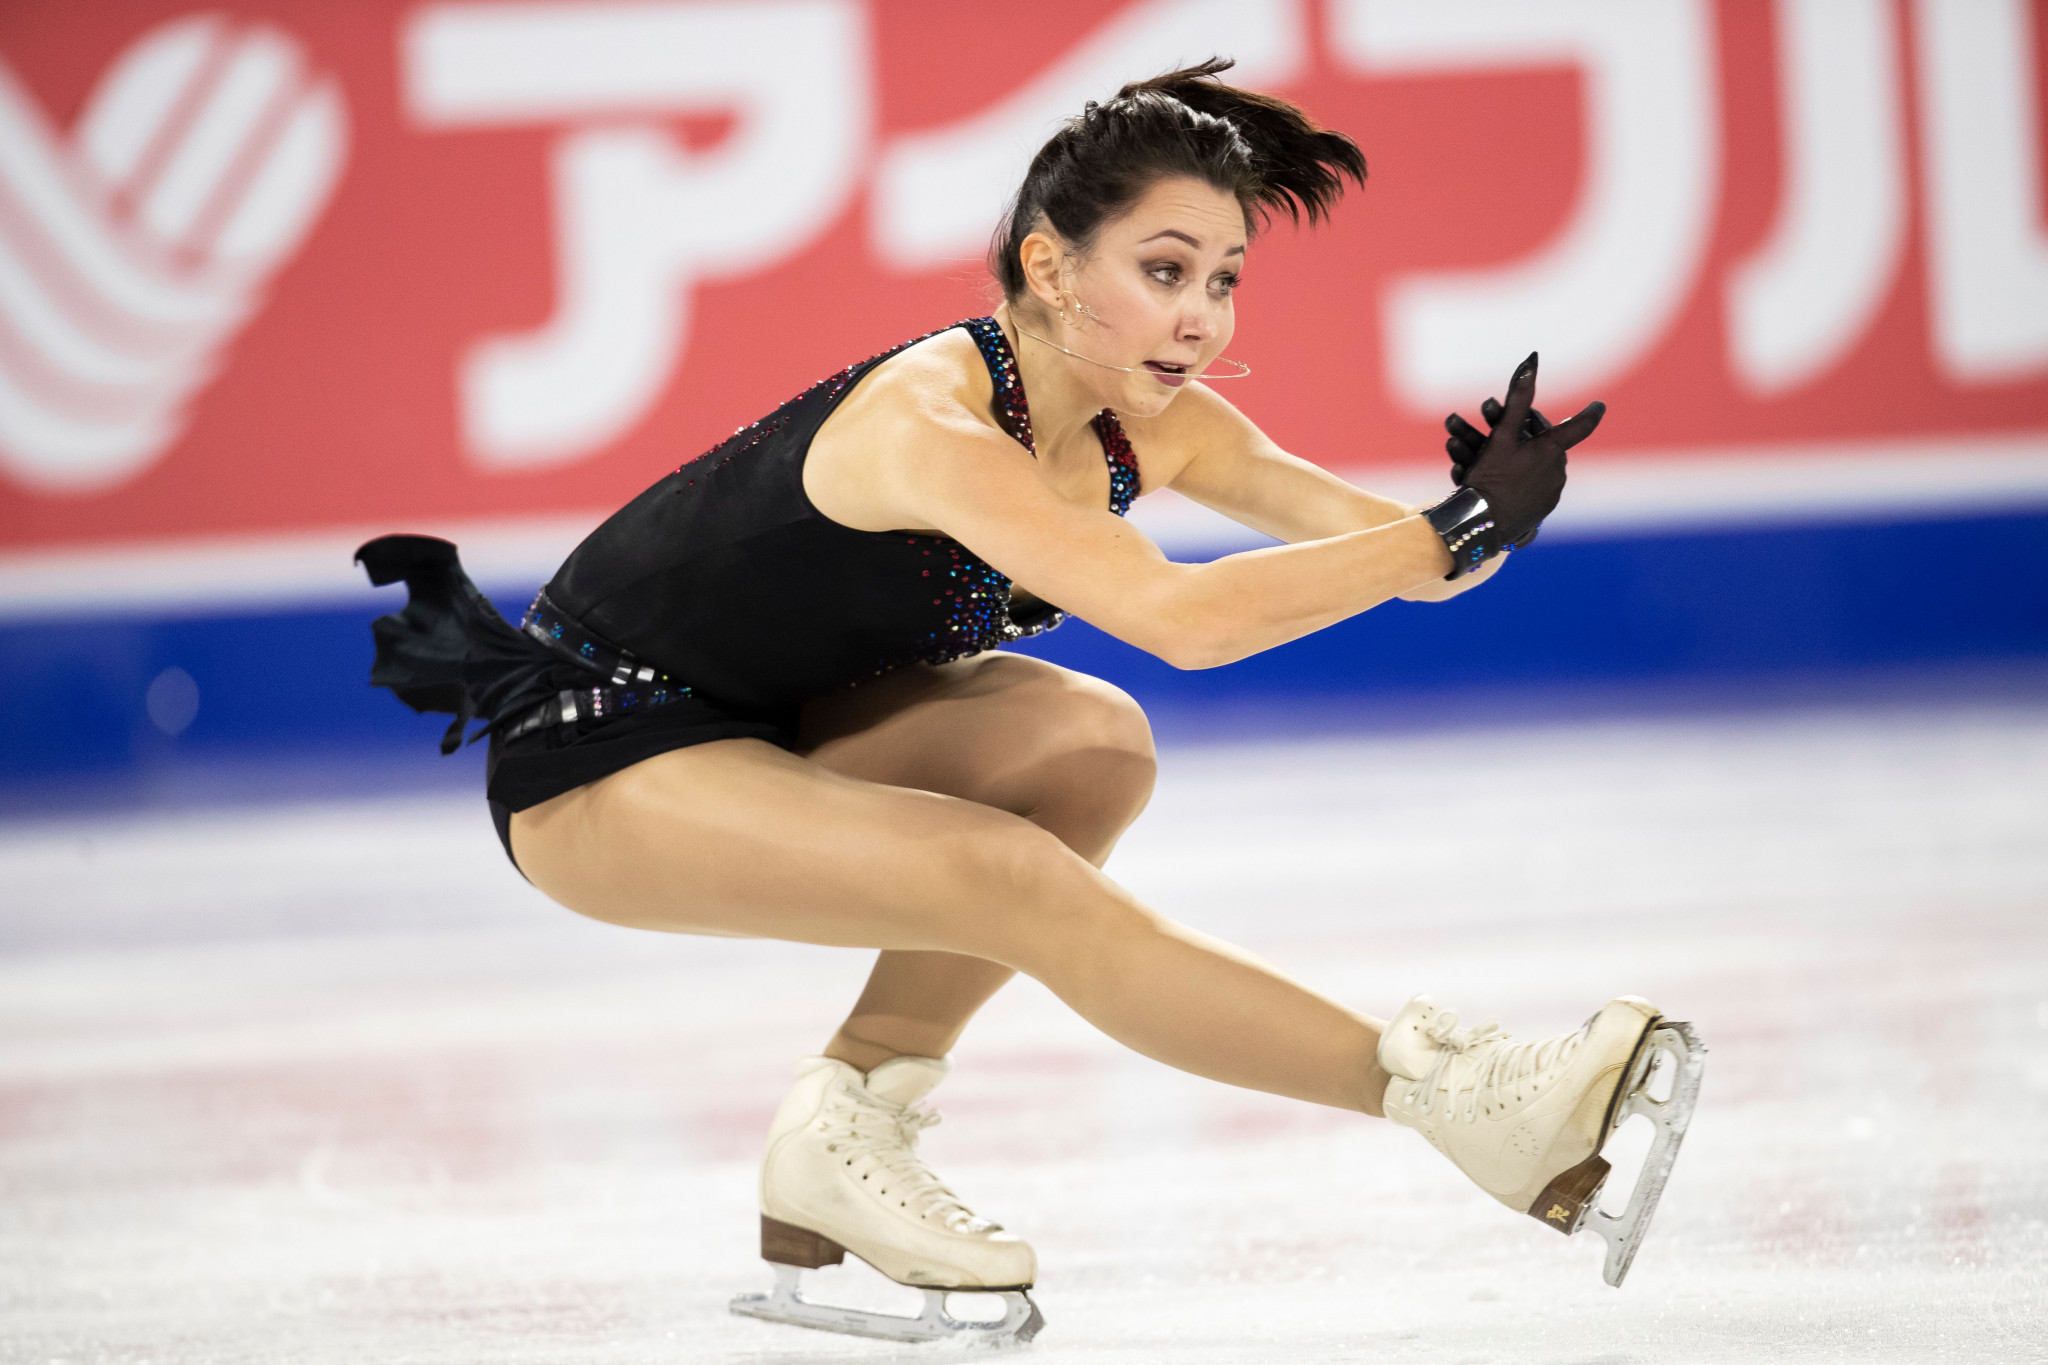 Russia's Elizaveta Tuktamysheva, the 2015 world and European champion, was the best performer in the women's short programme ©Getty Images